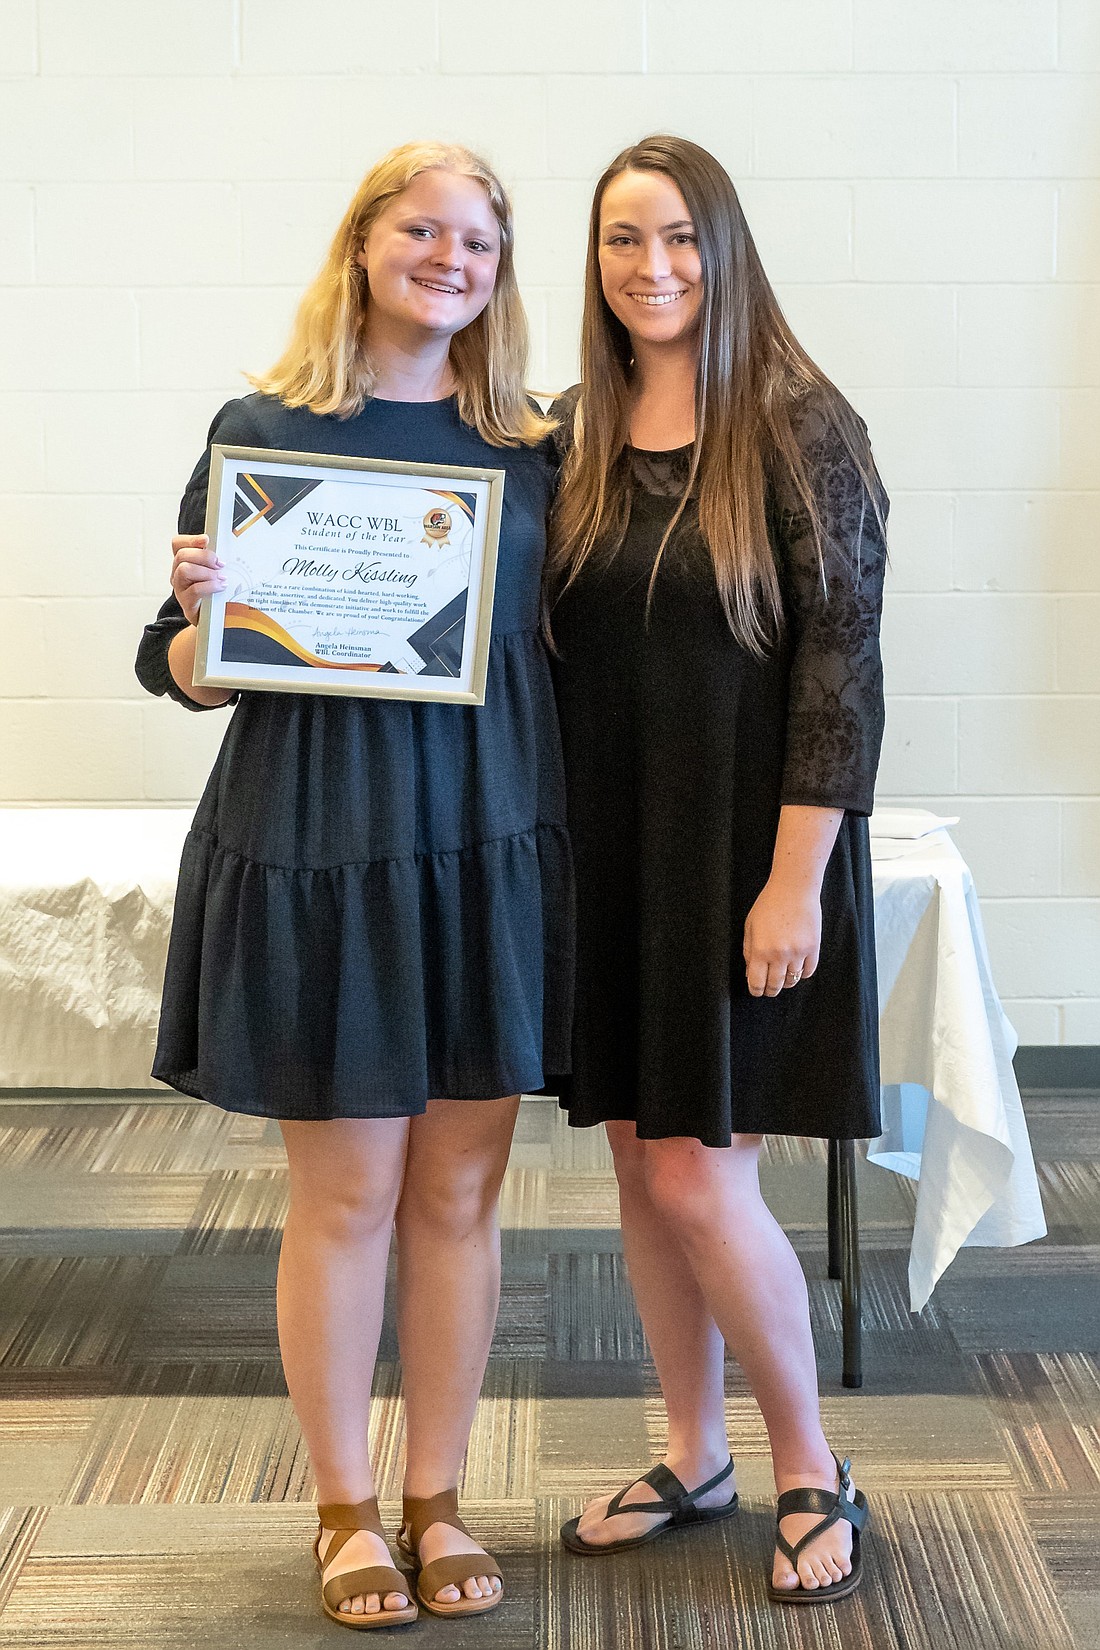 Molly Kissling with Lauren Klusman, director of marketing and communications at the Kosciusko Chamber of Commerce, where Kissling completed an internship in her business pathway. Photo Provided.